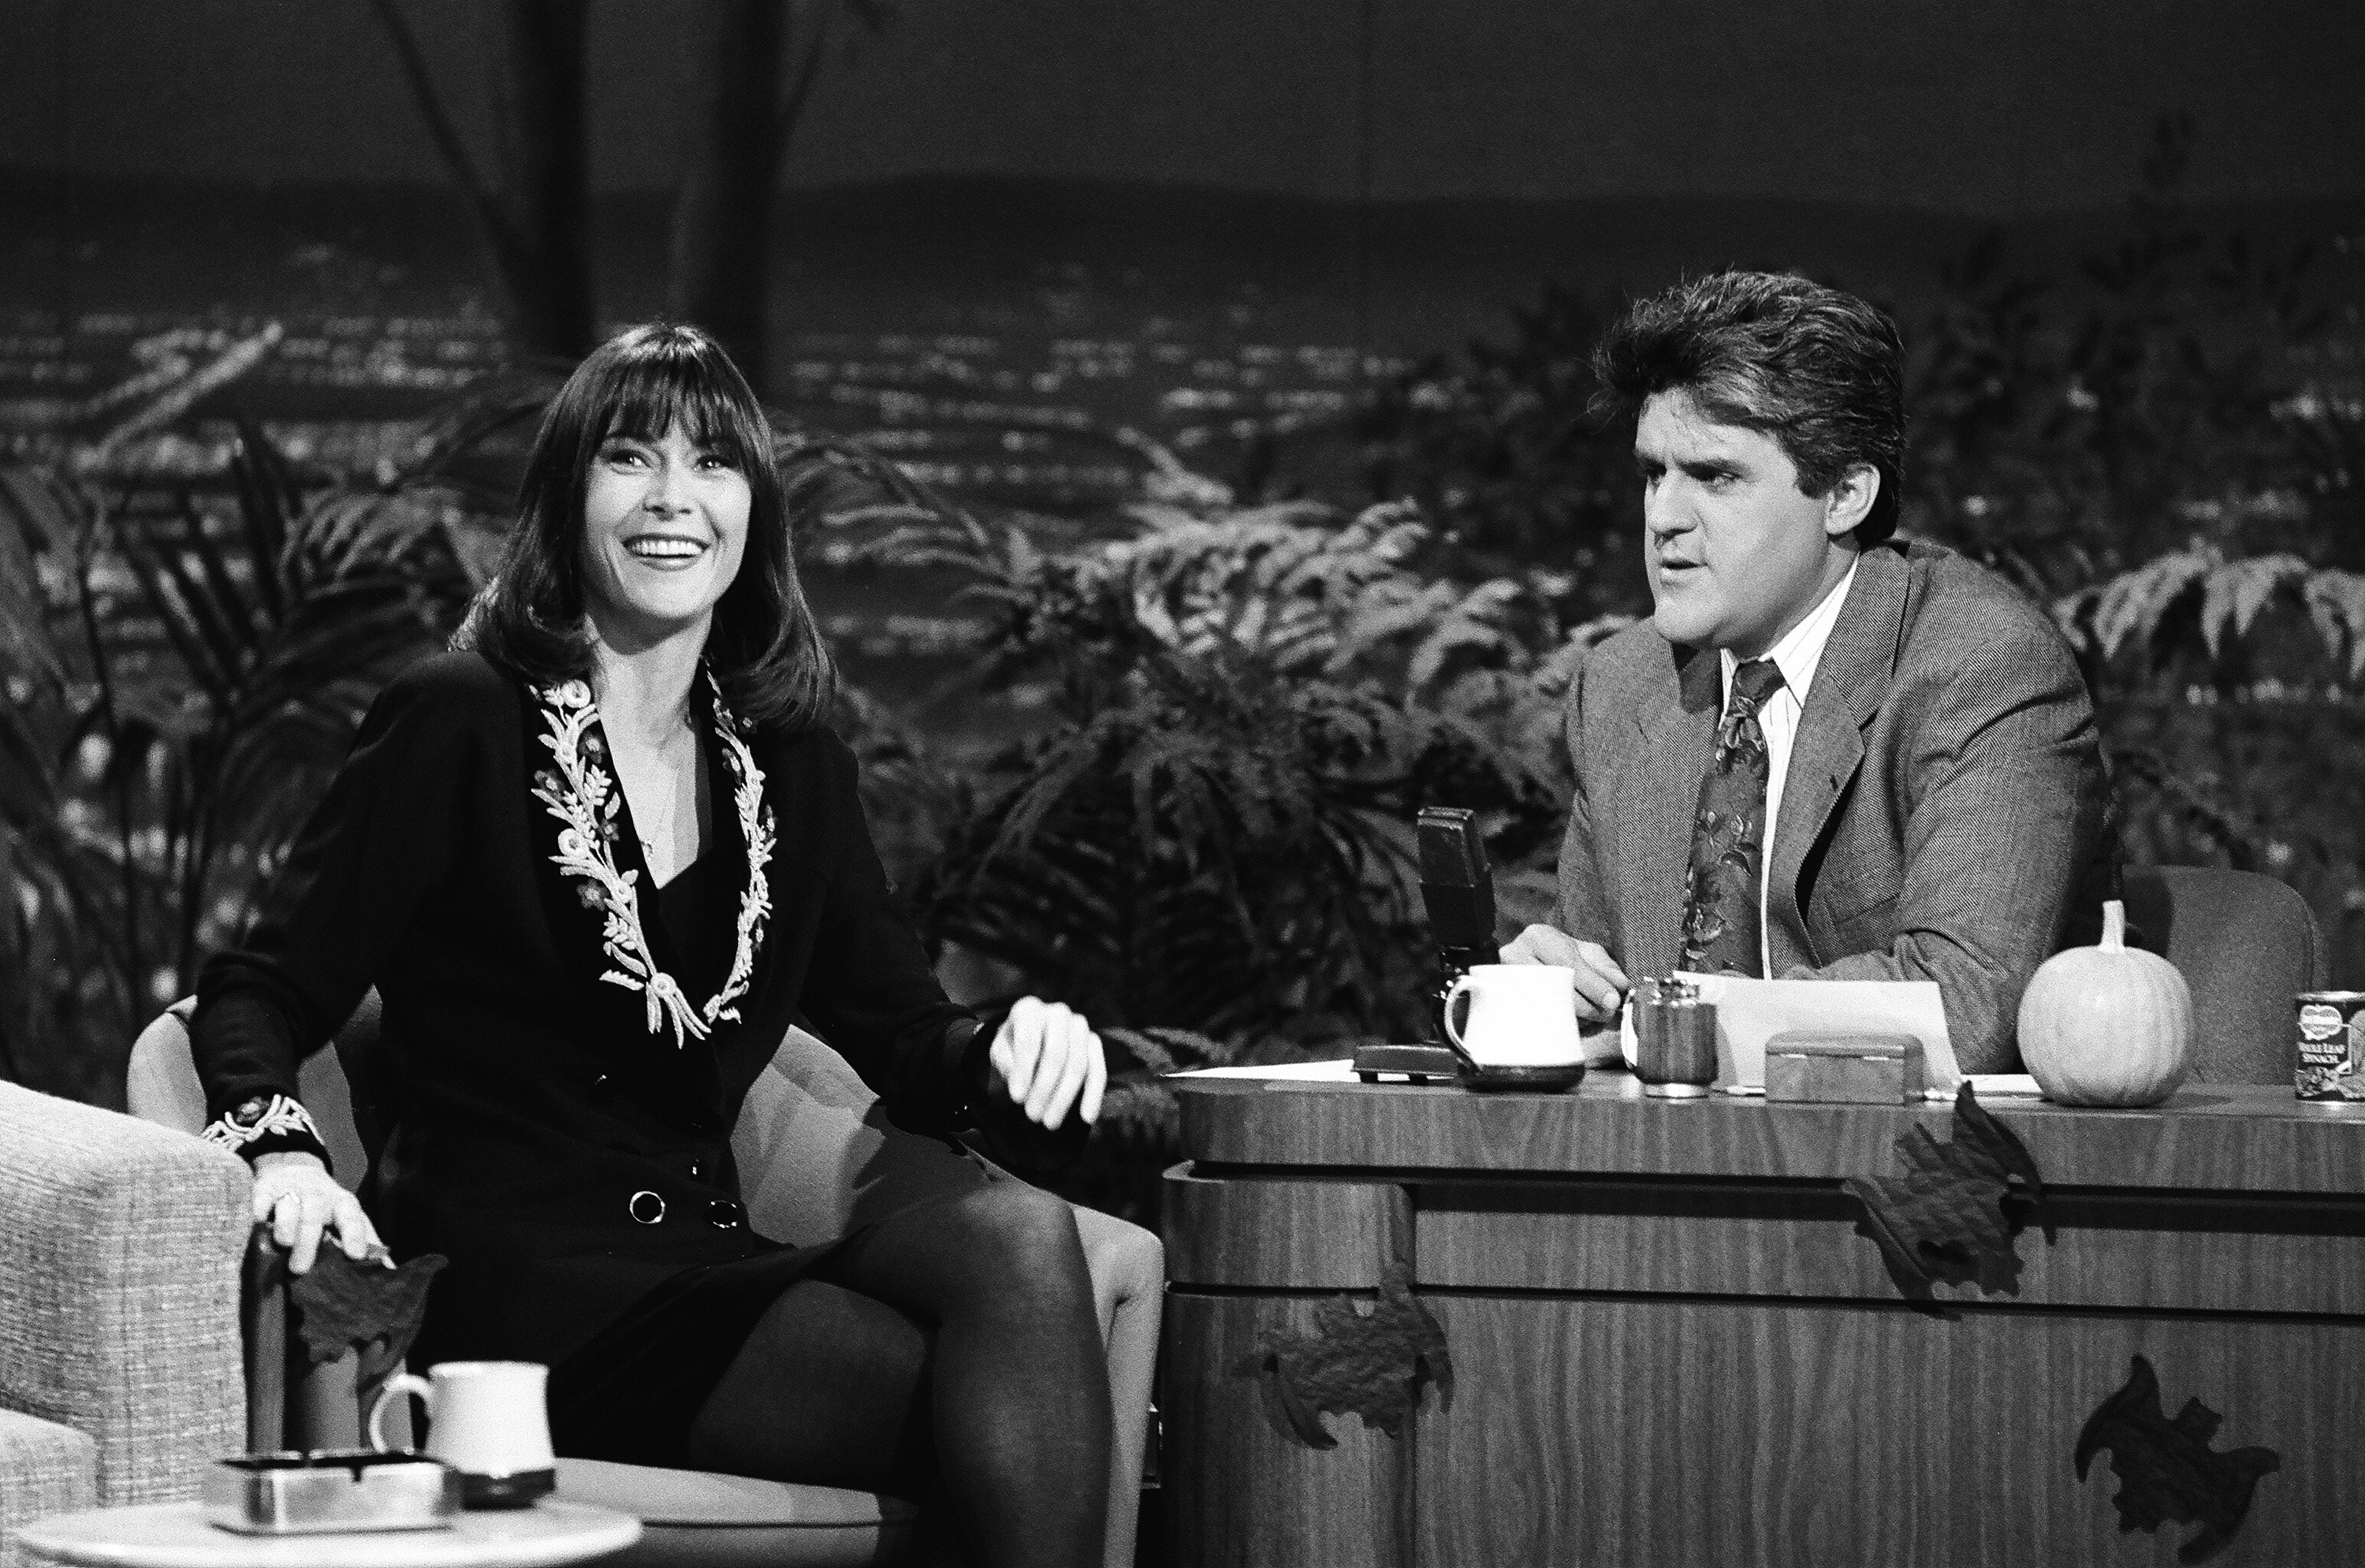 Kate Jackson being interviewd by Jay Leno on "The Tonight Show Starring Johnny Carson" on October 30, 1990 | Source: Getty Images